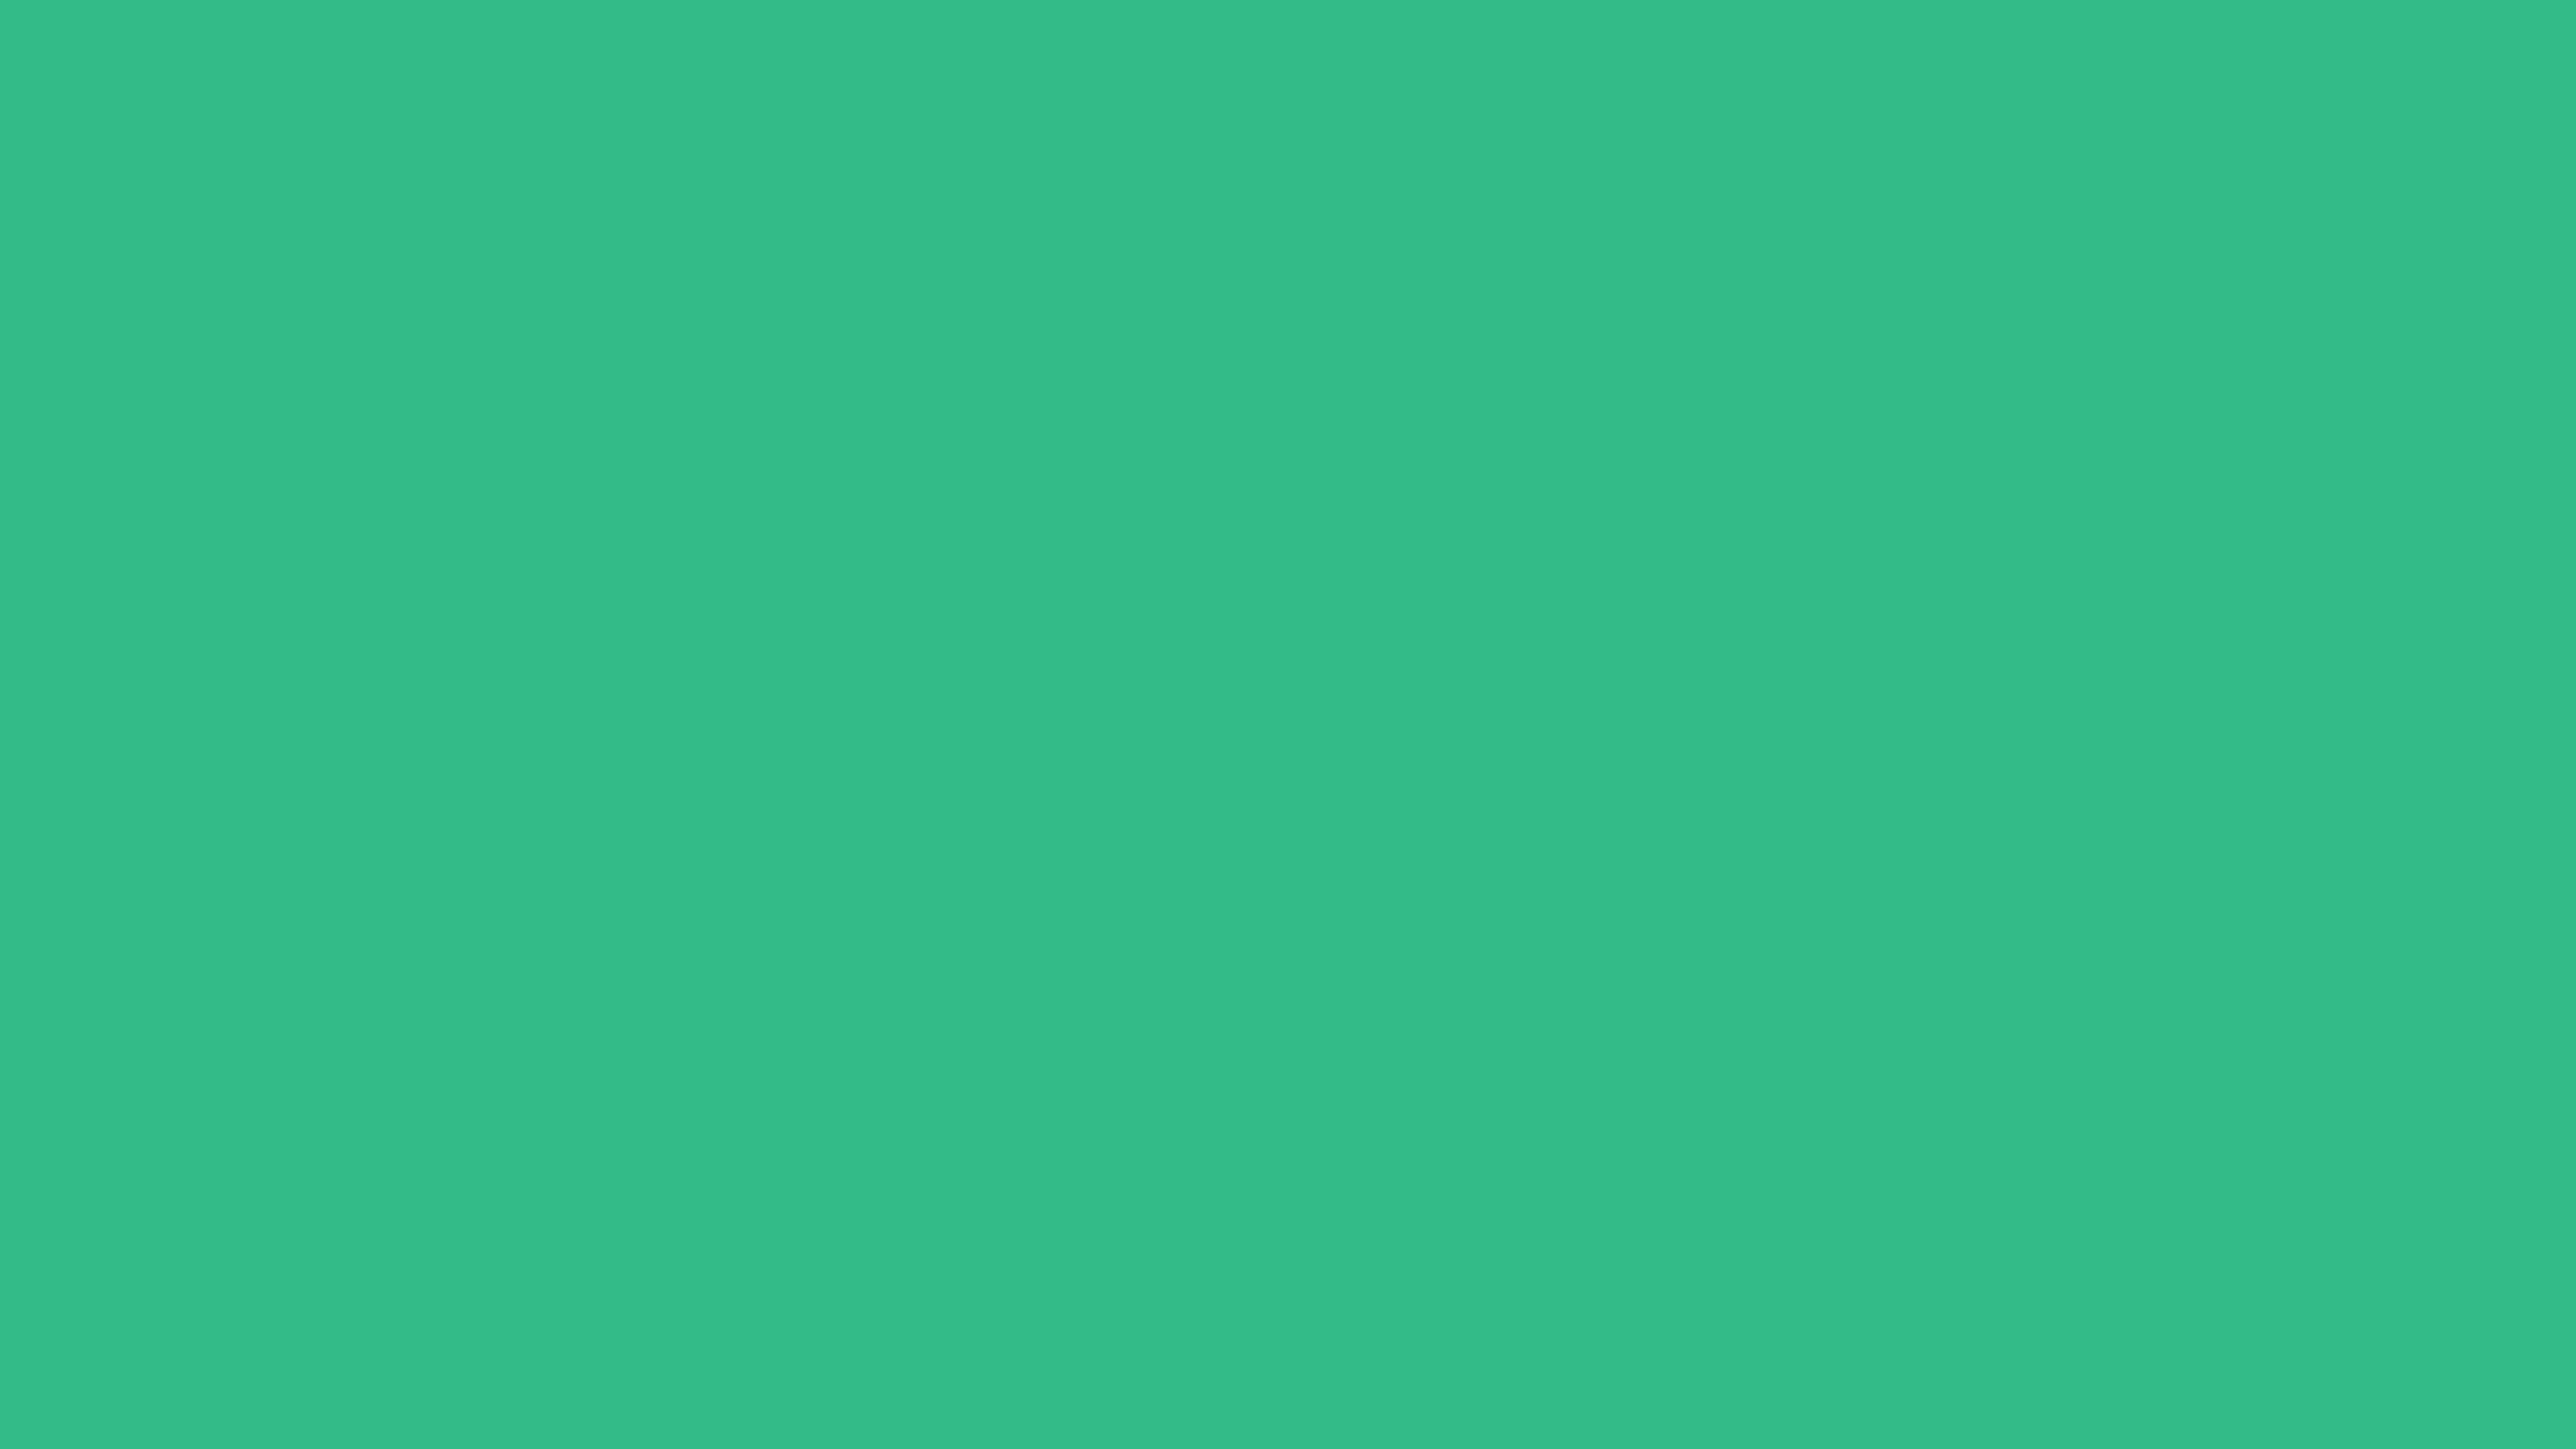 colorswall on X: Shades XKCD Color jade green #2baf6a hex #279e5f,  #228c55, #1e7a4a, #1a6940, #165835, #11462a, #0d3520, #092315, #04110b,  #000000 #colors #palette   /  X